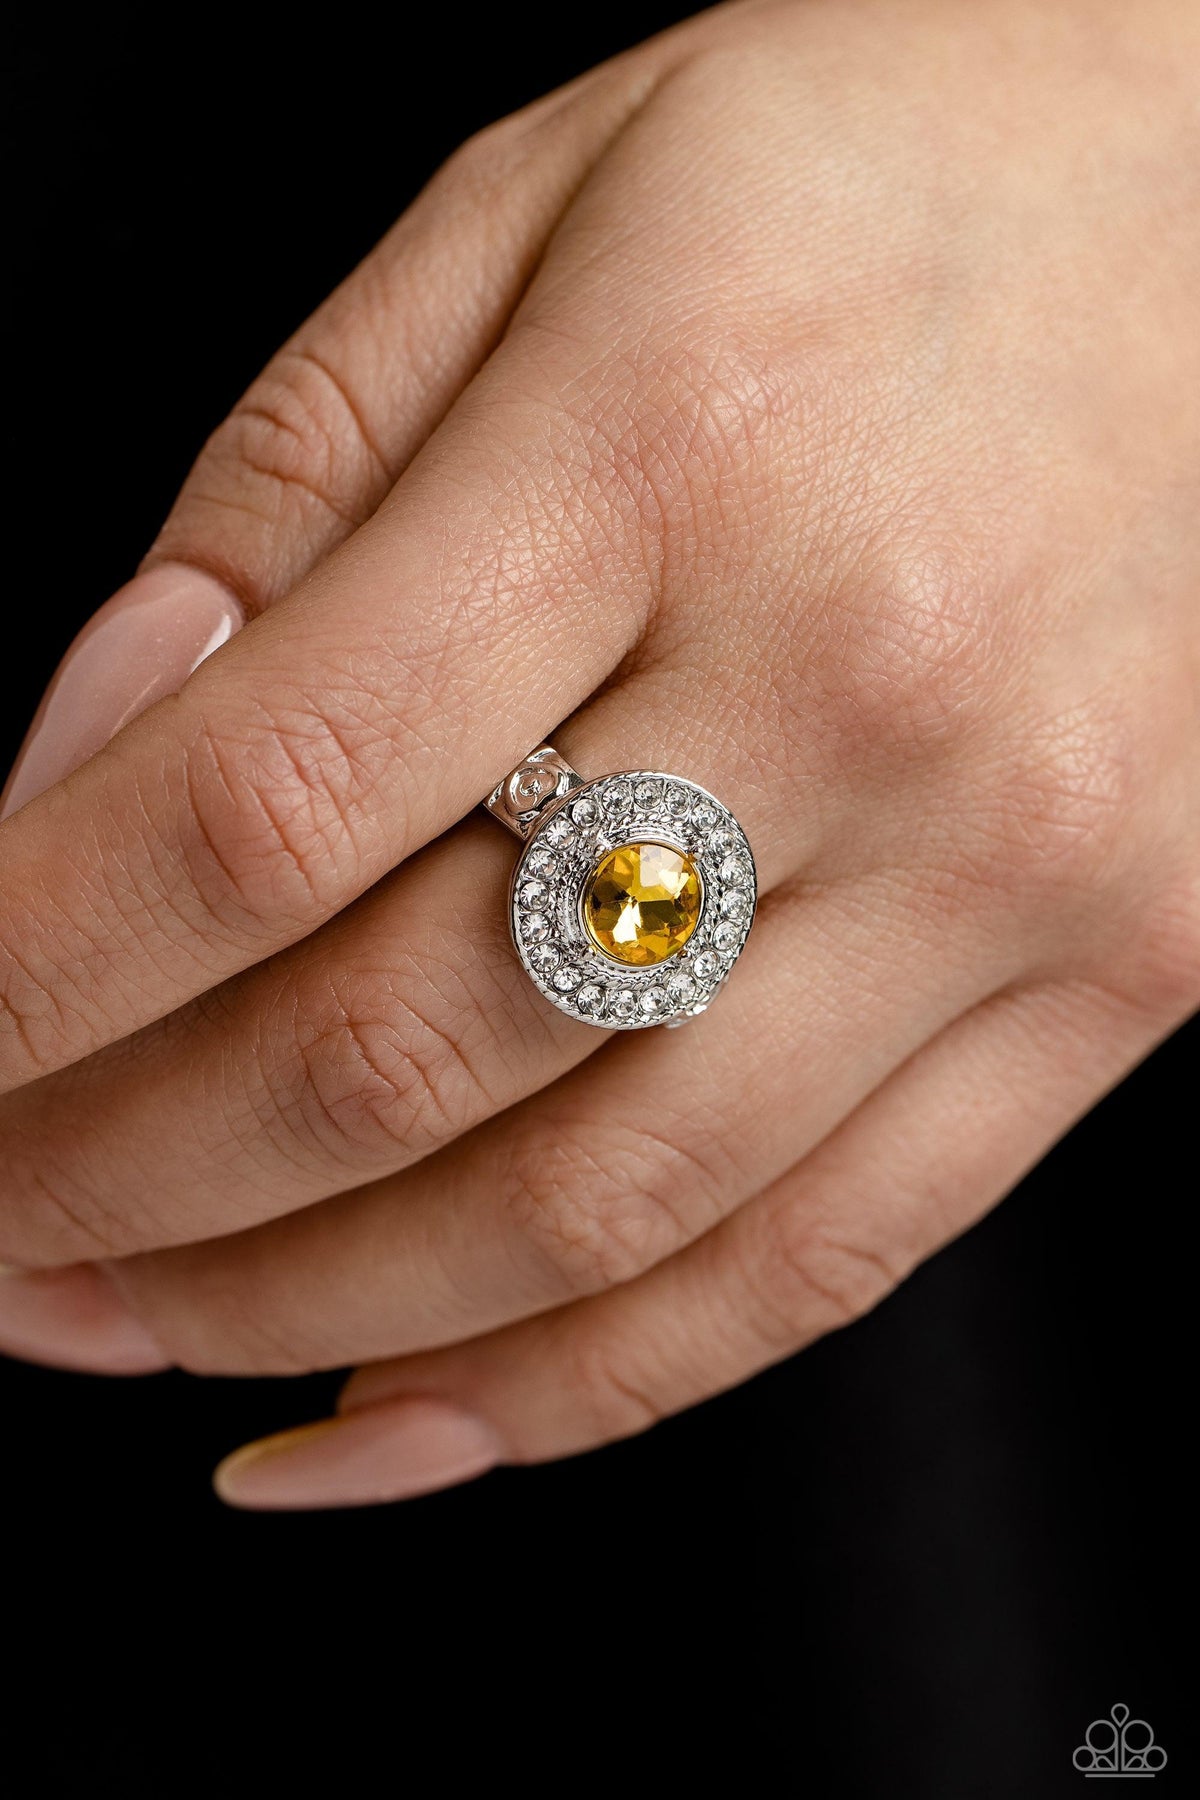 Targeted Timelessness Yellow Rhinestone Ring - Paparazzi Accessories-on model - CarasShop.com - $5 Jewelry by Cara Jewels